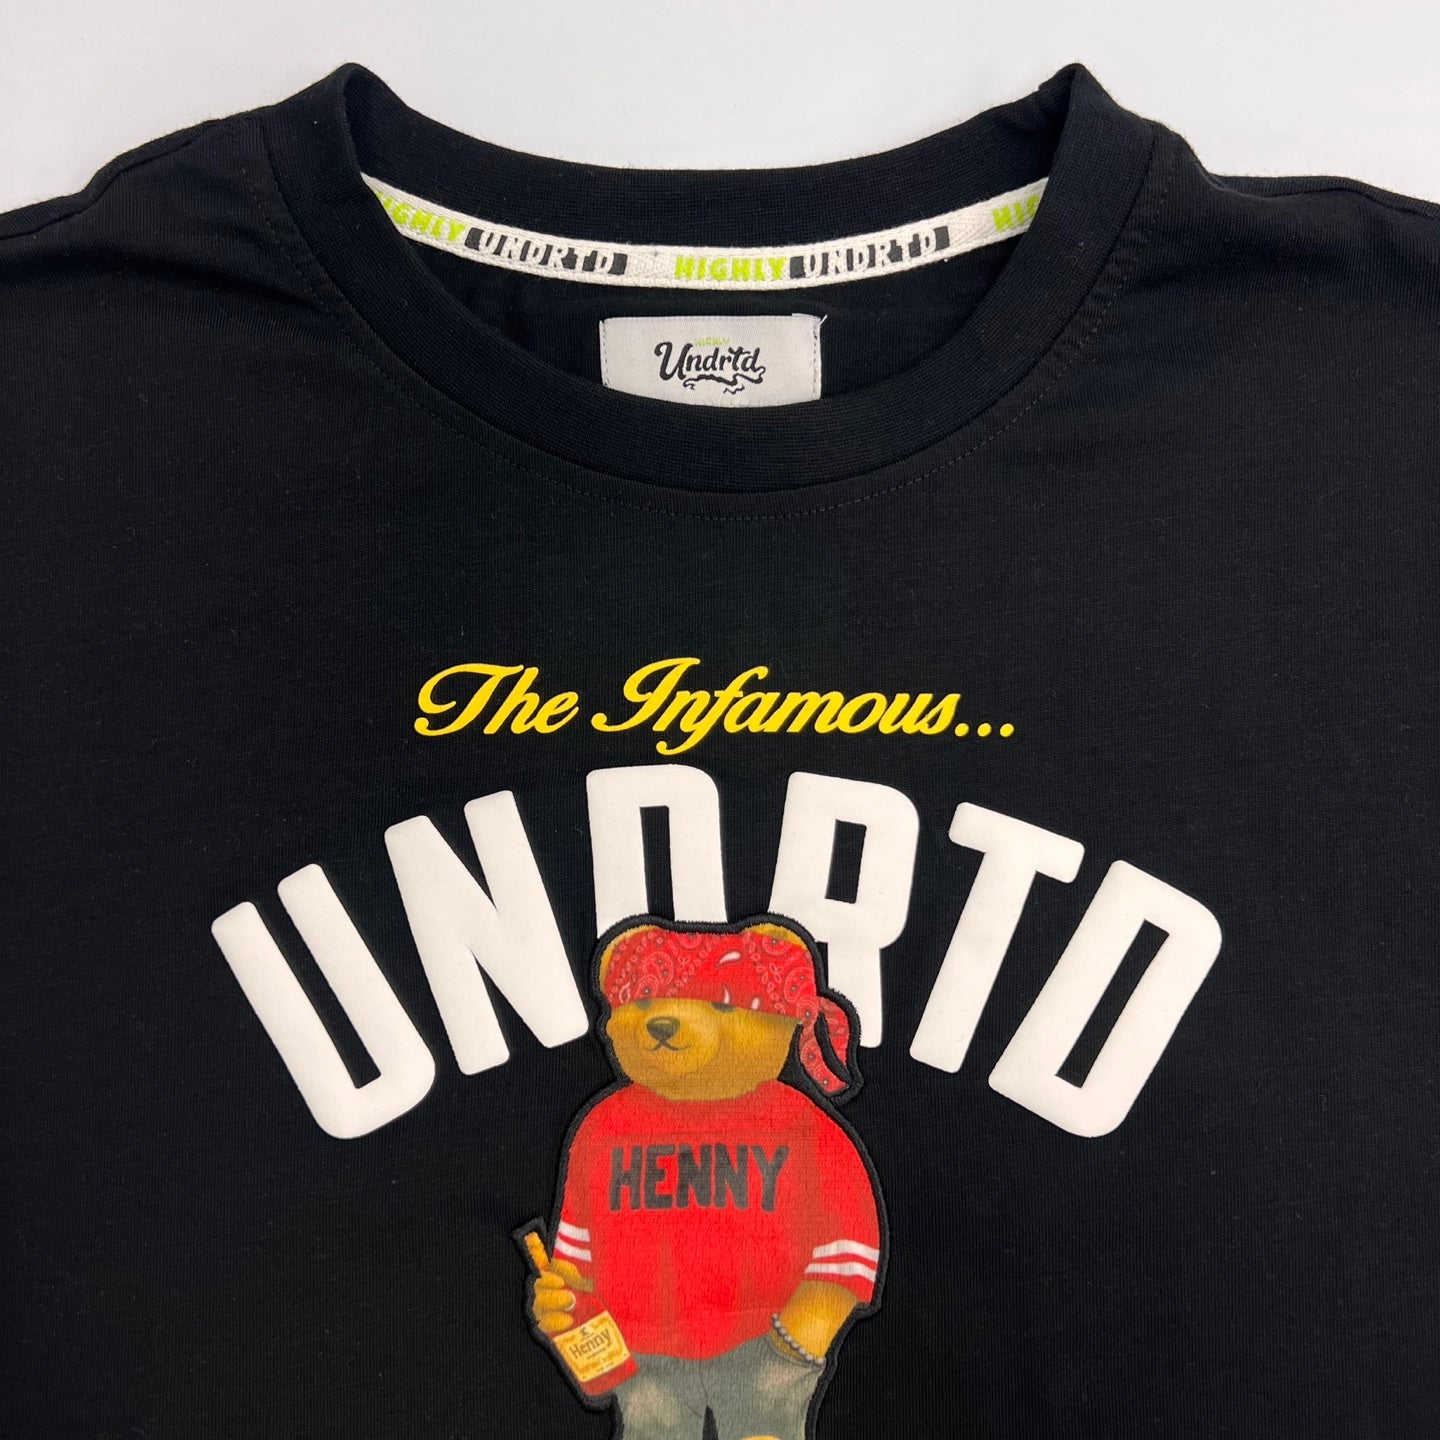 HIGHLY UNDRTD Henny Graphic T-Shirt